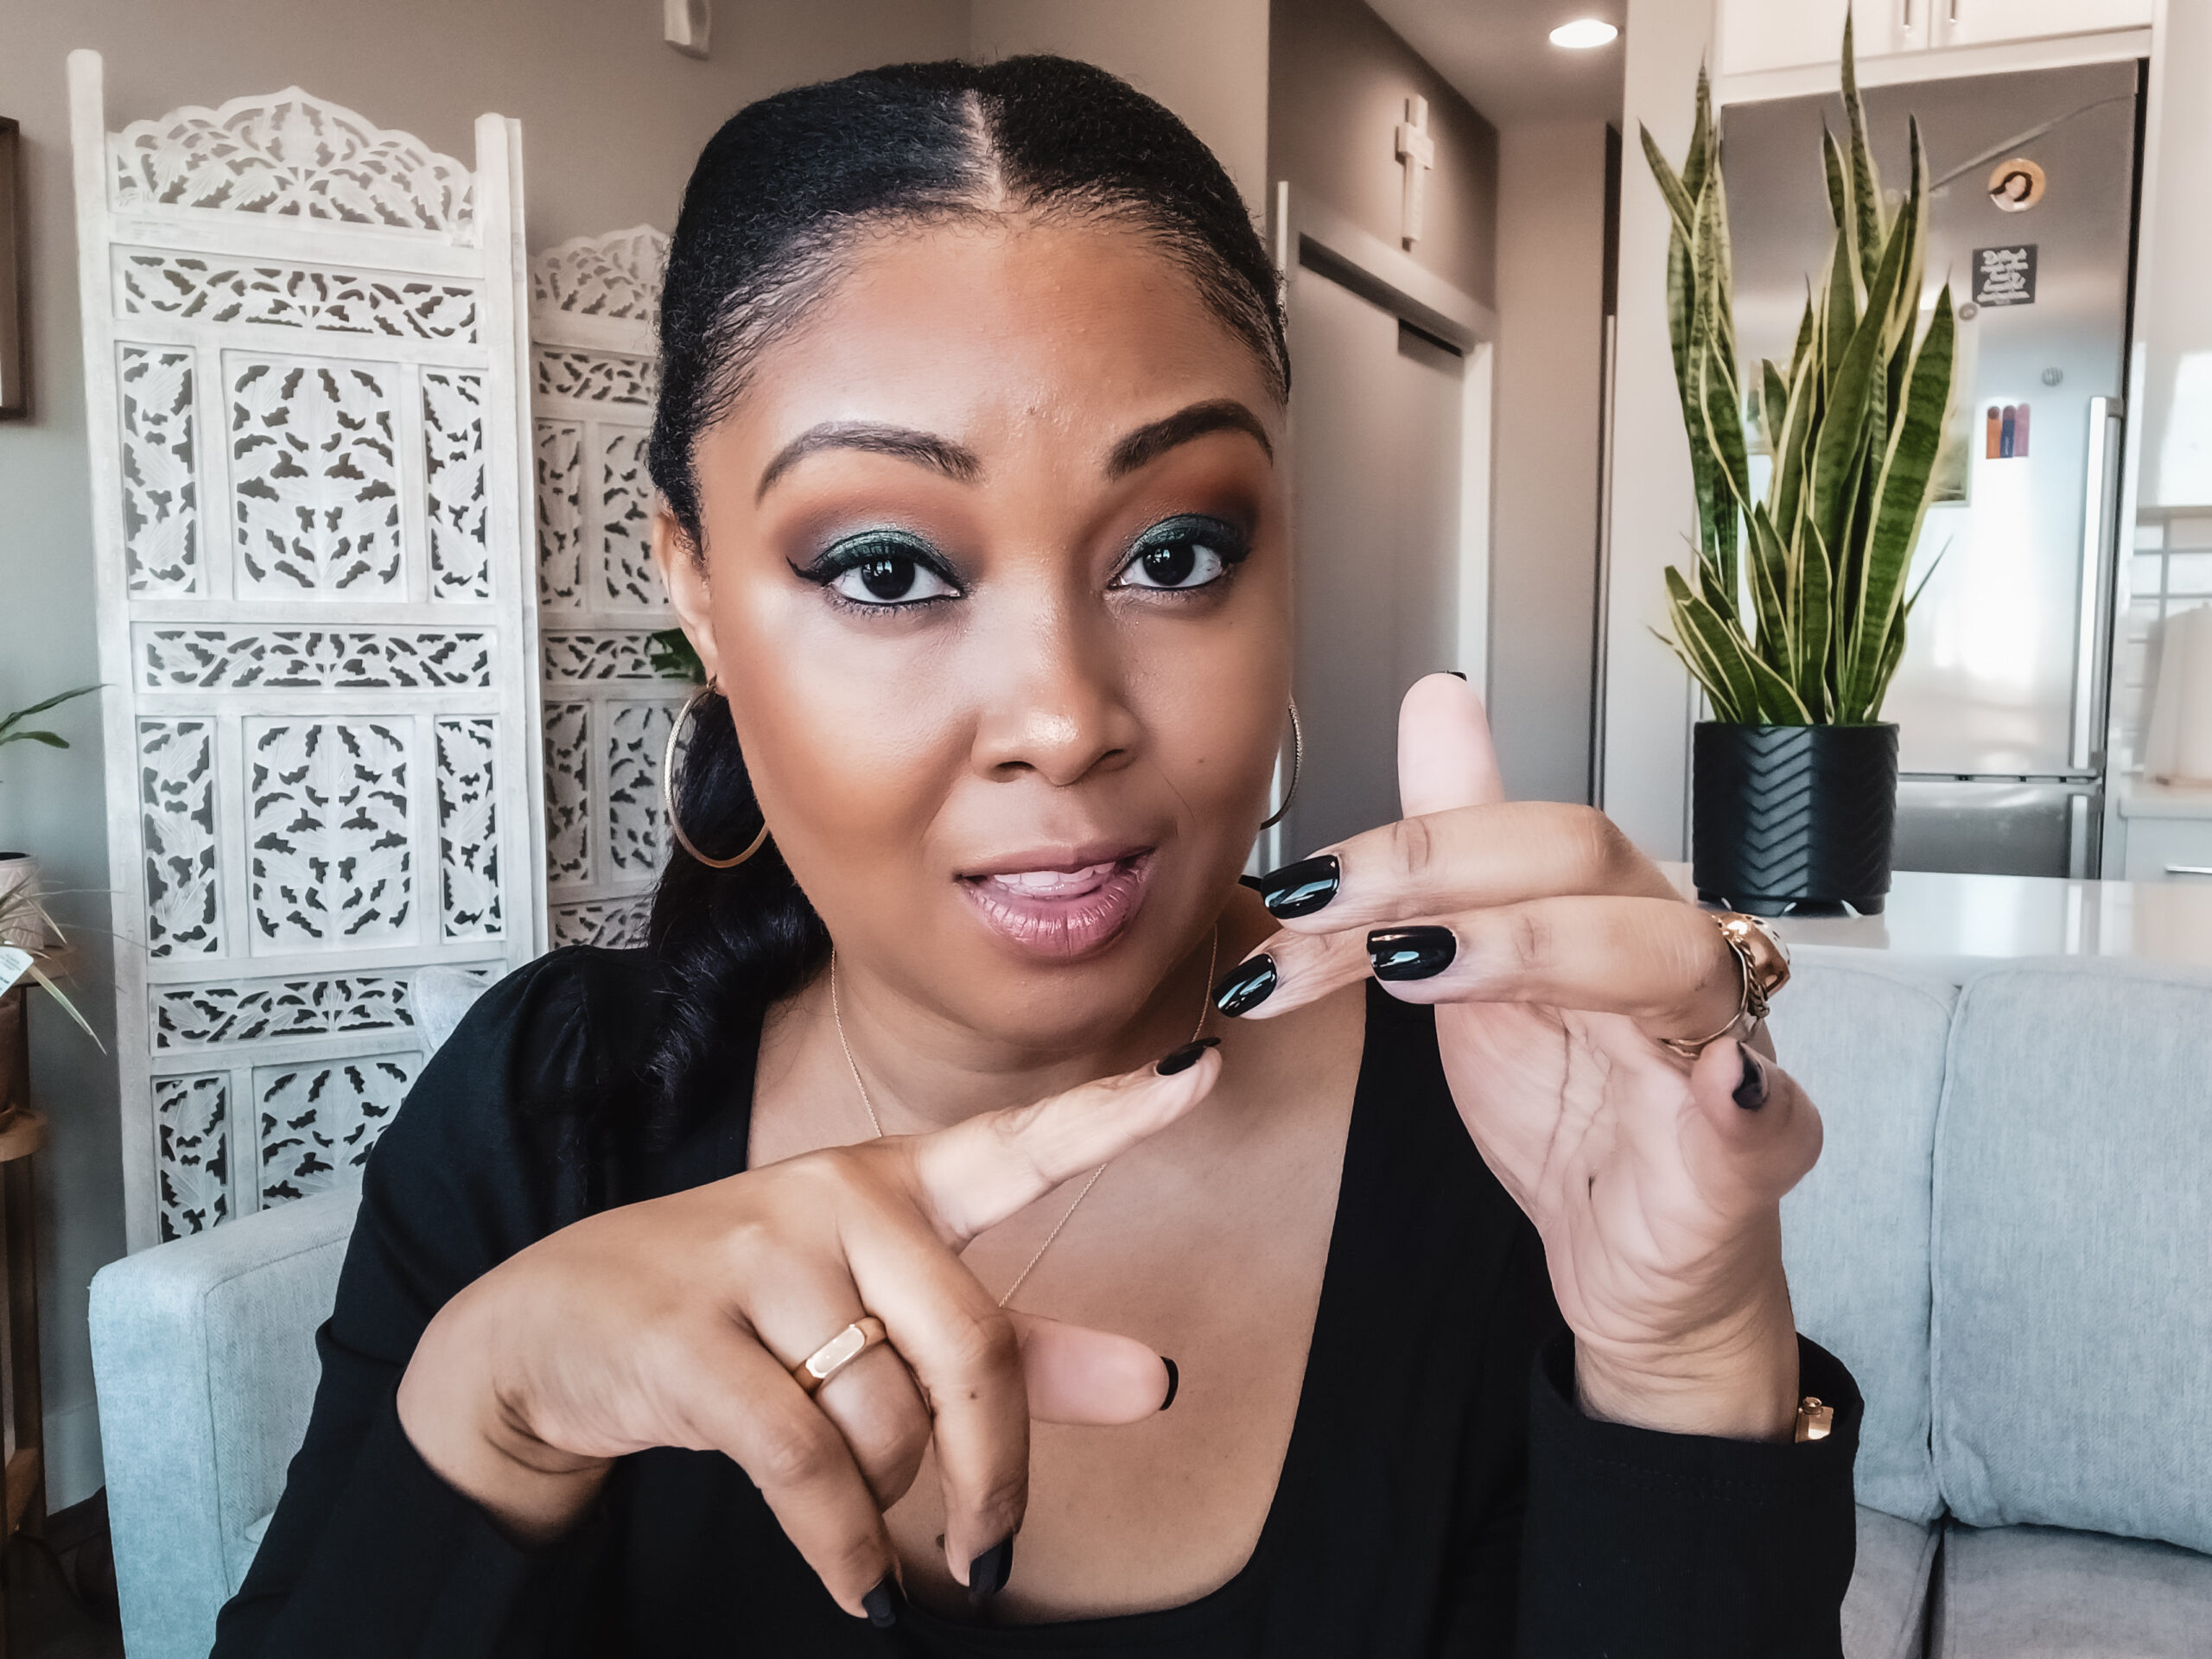 Blogger Rogan counts down the things she did to change her life. She is wearing a black shirt, has her hair in a ponytail and has black manicured nails. She smiles into the camera.